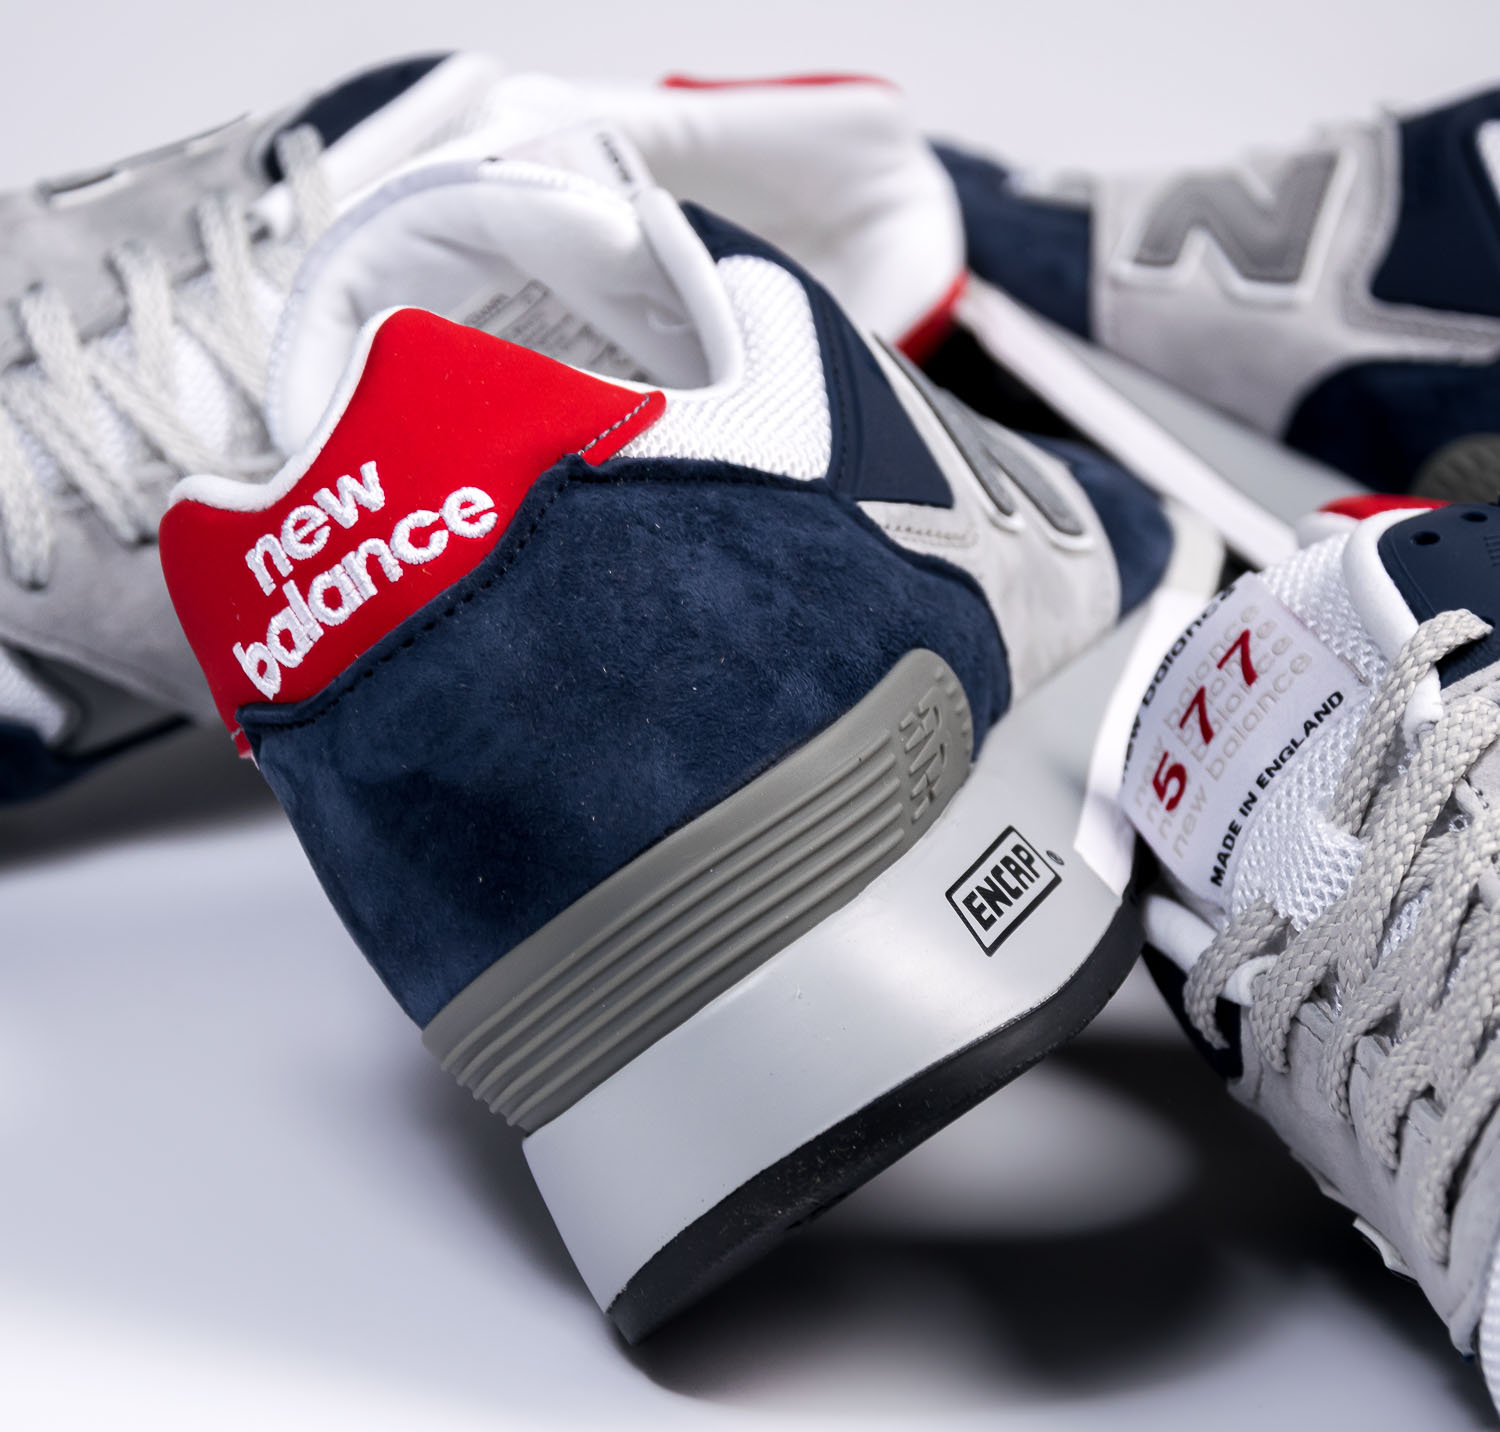 New Balance 577 - White Navy Red - Made In UK